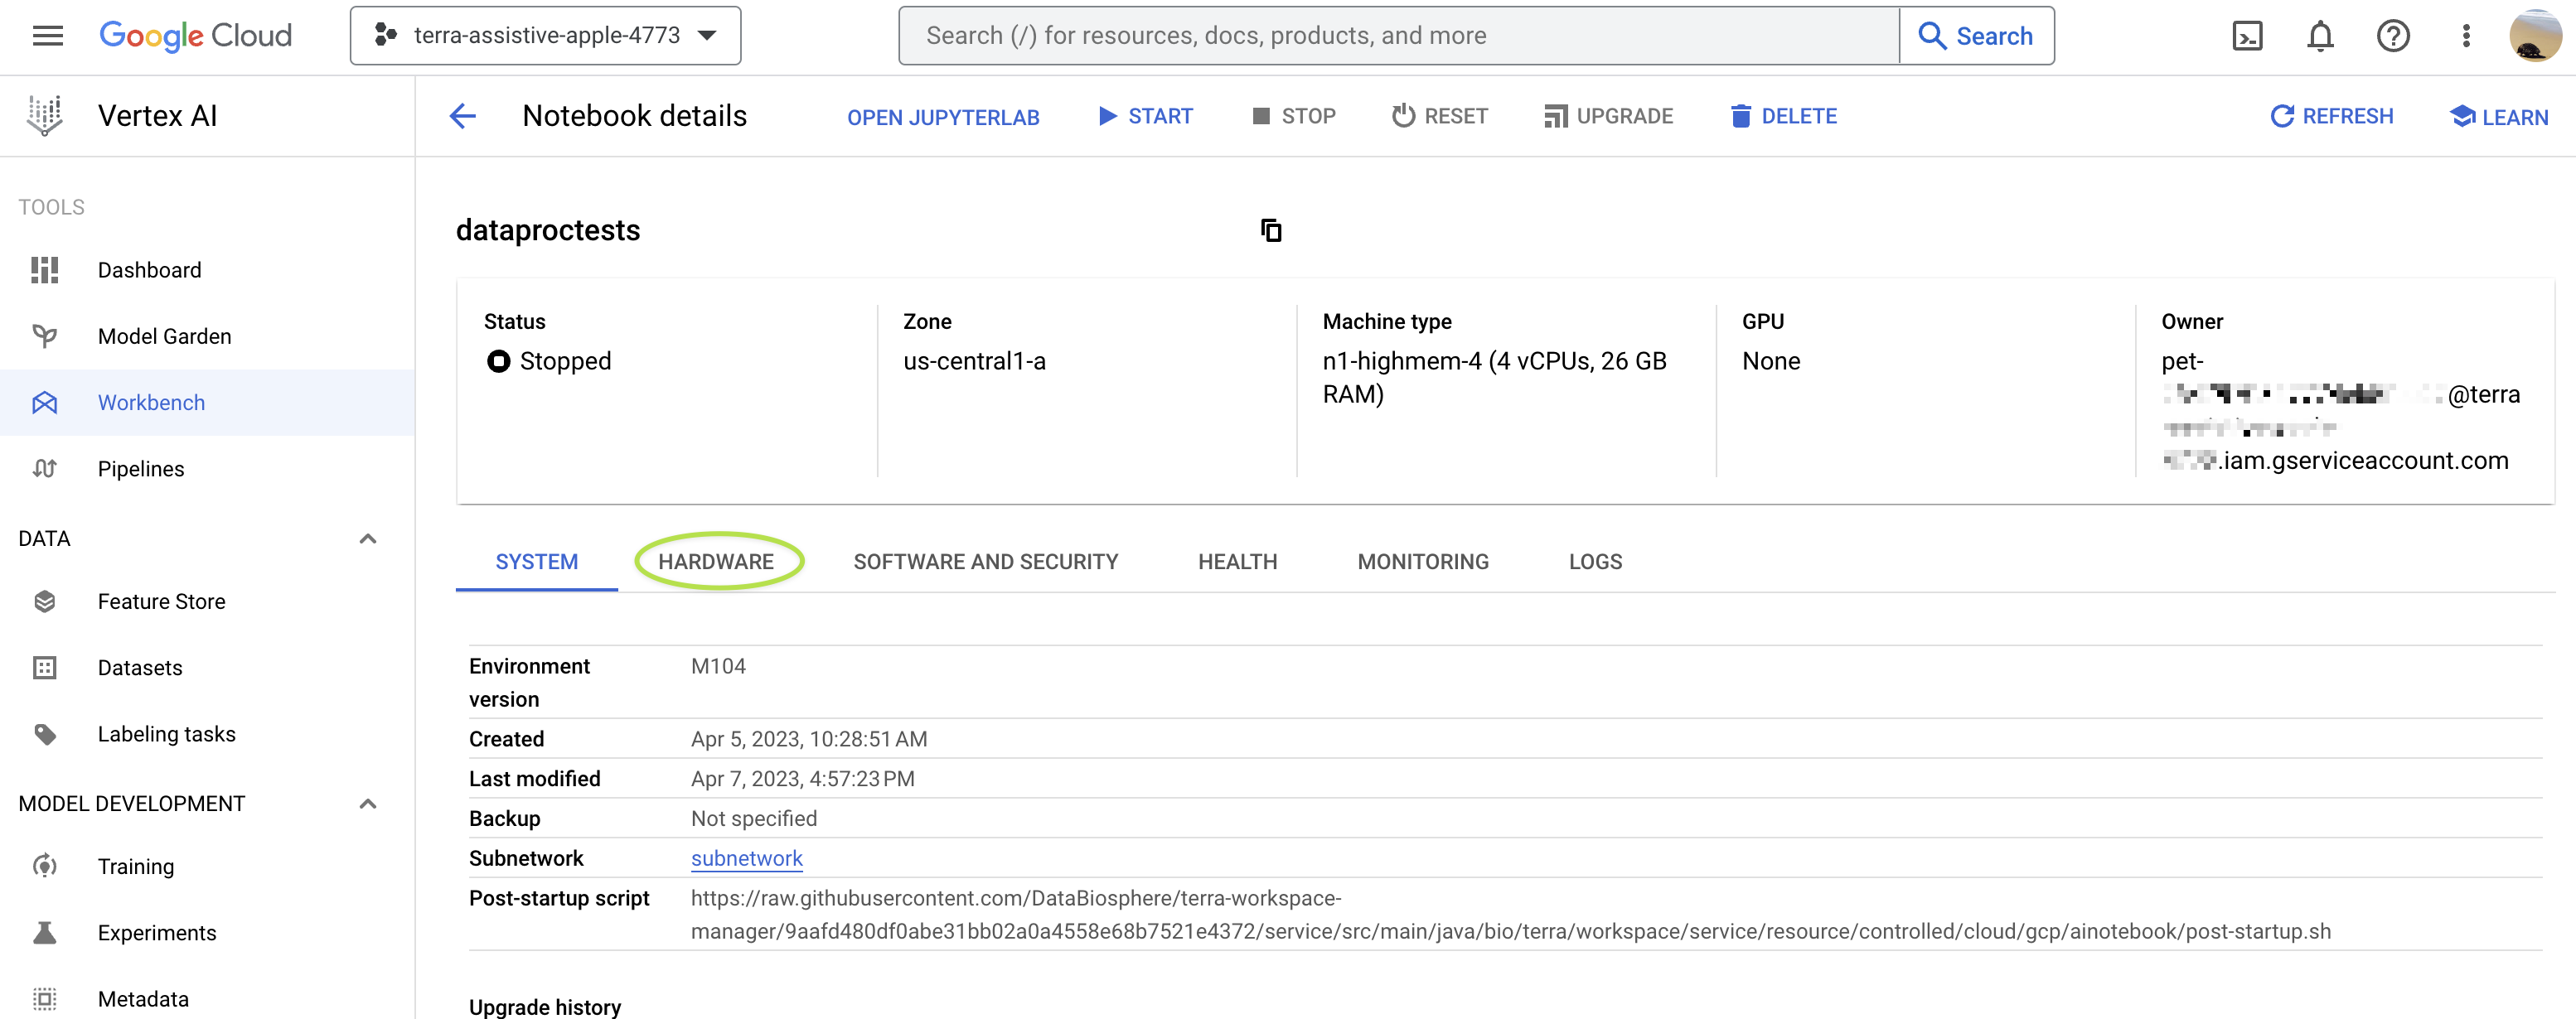 Screenshot of Google Cloud console showing a Workbench environment, with HARDWARE tab highlighted.